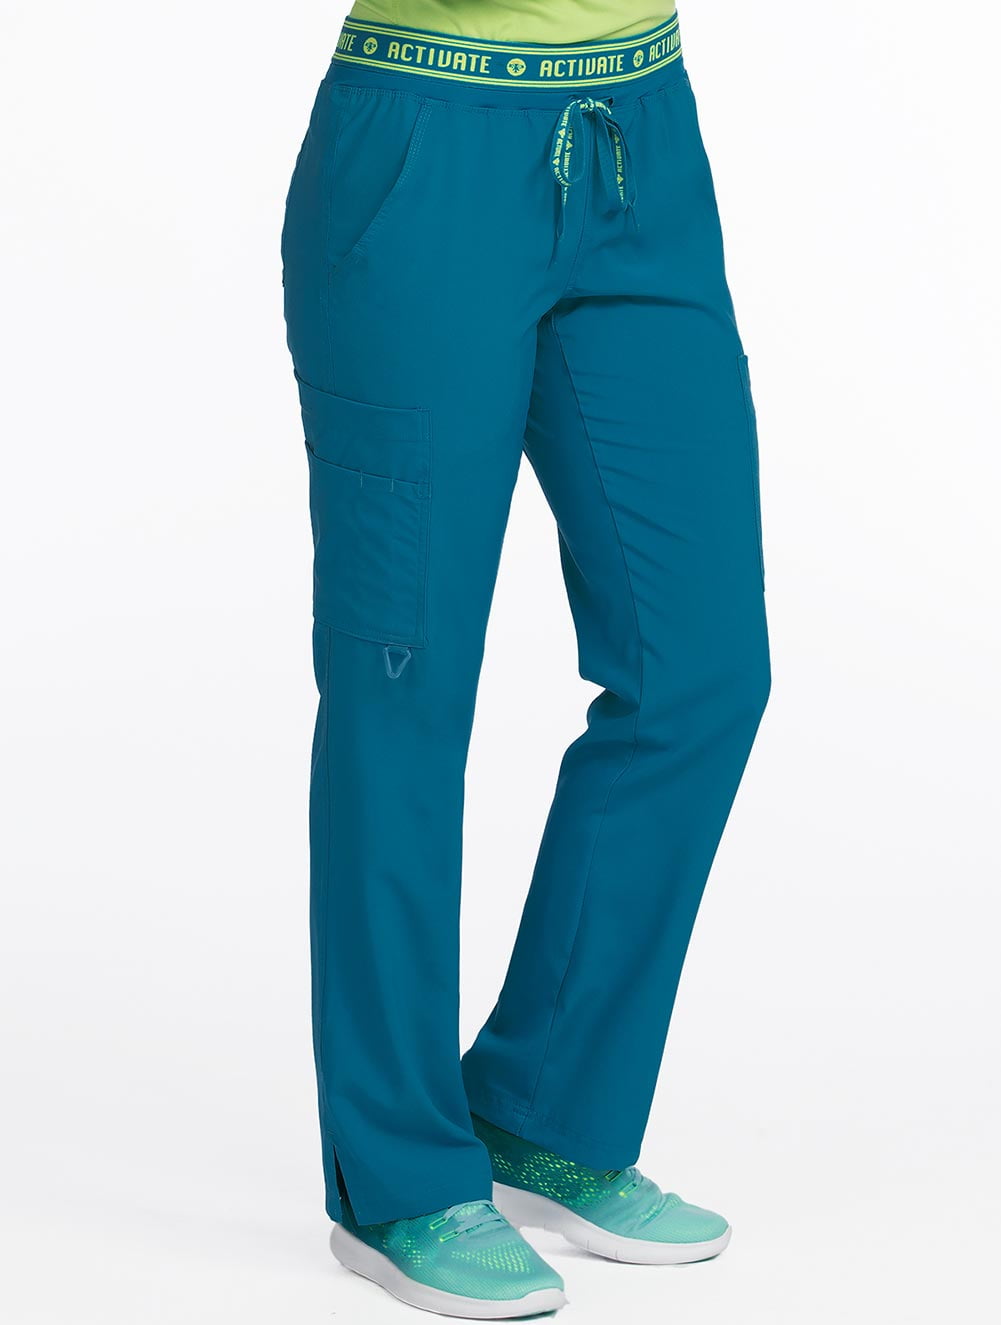 Med Couture 'Activate' Flow Pant Scrub Bottoms 